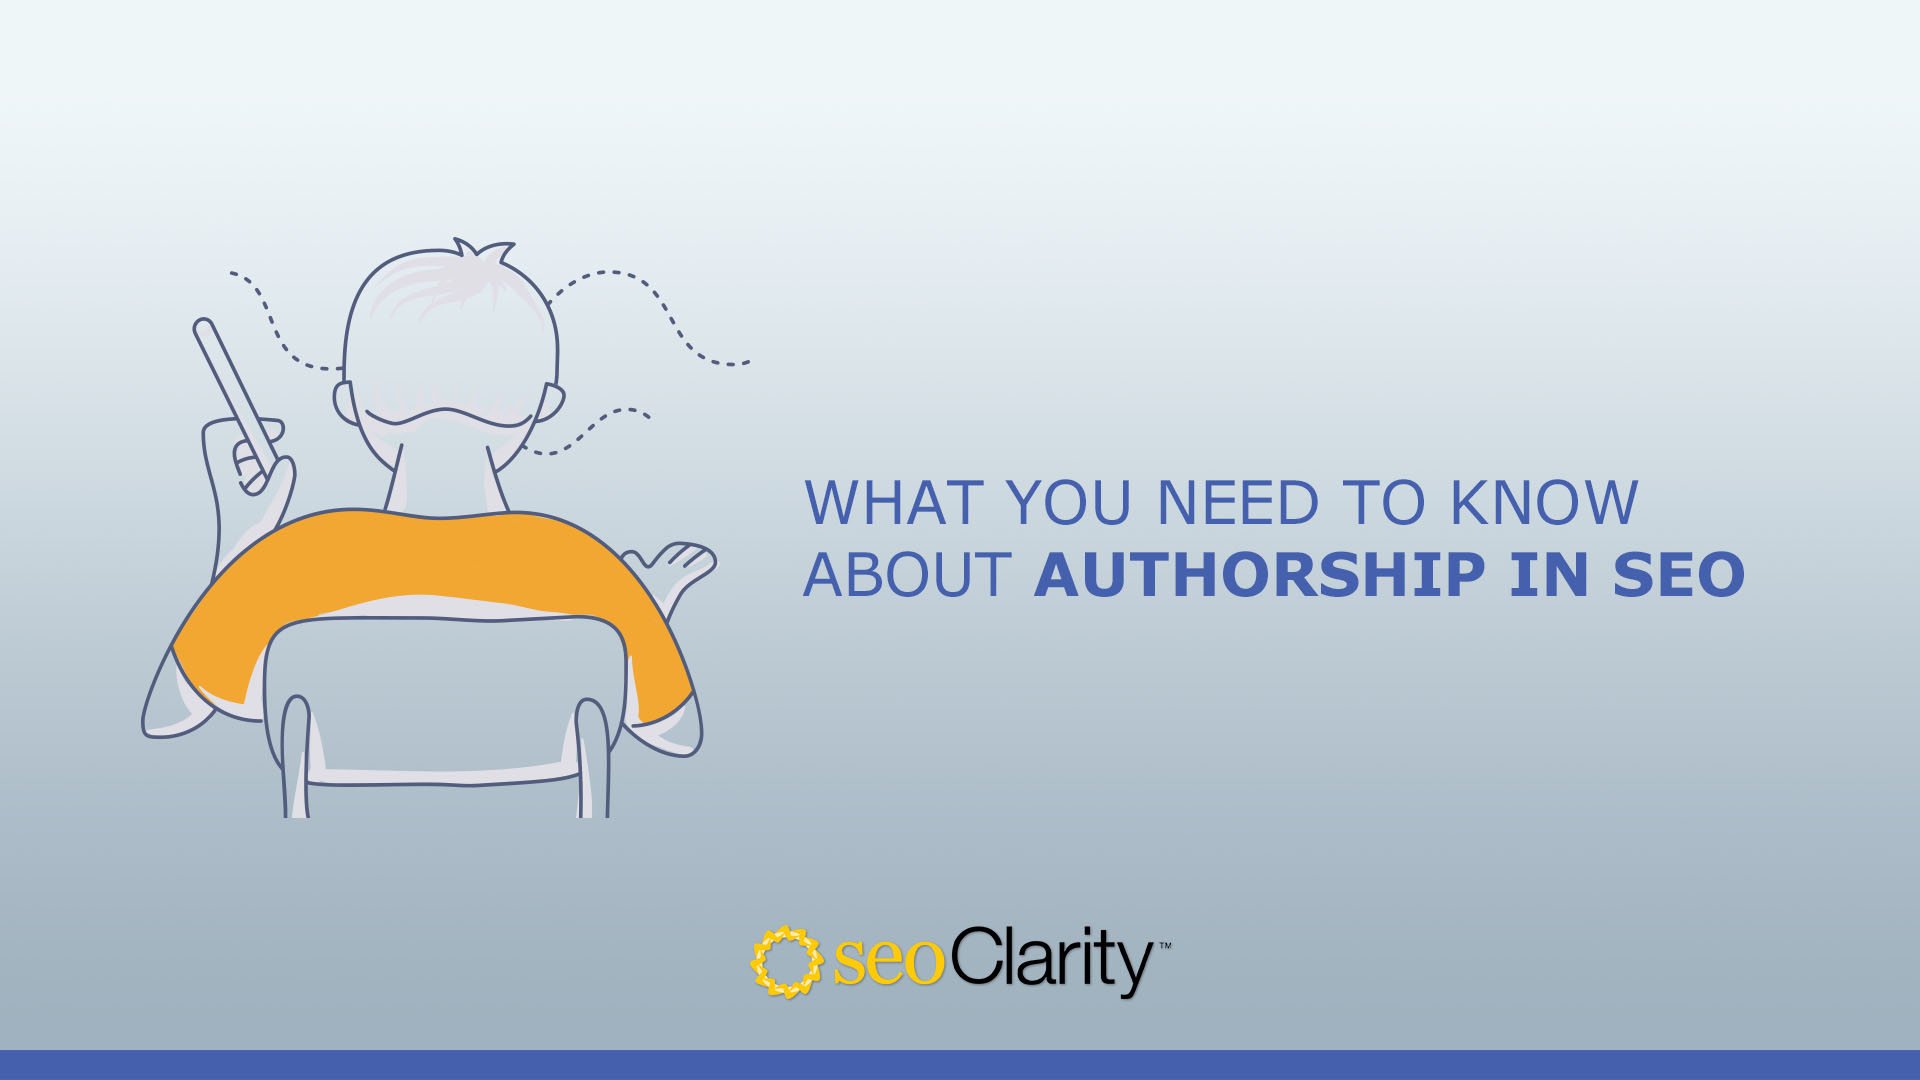 Google Authorship: Is It Still Important for SEO?